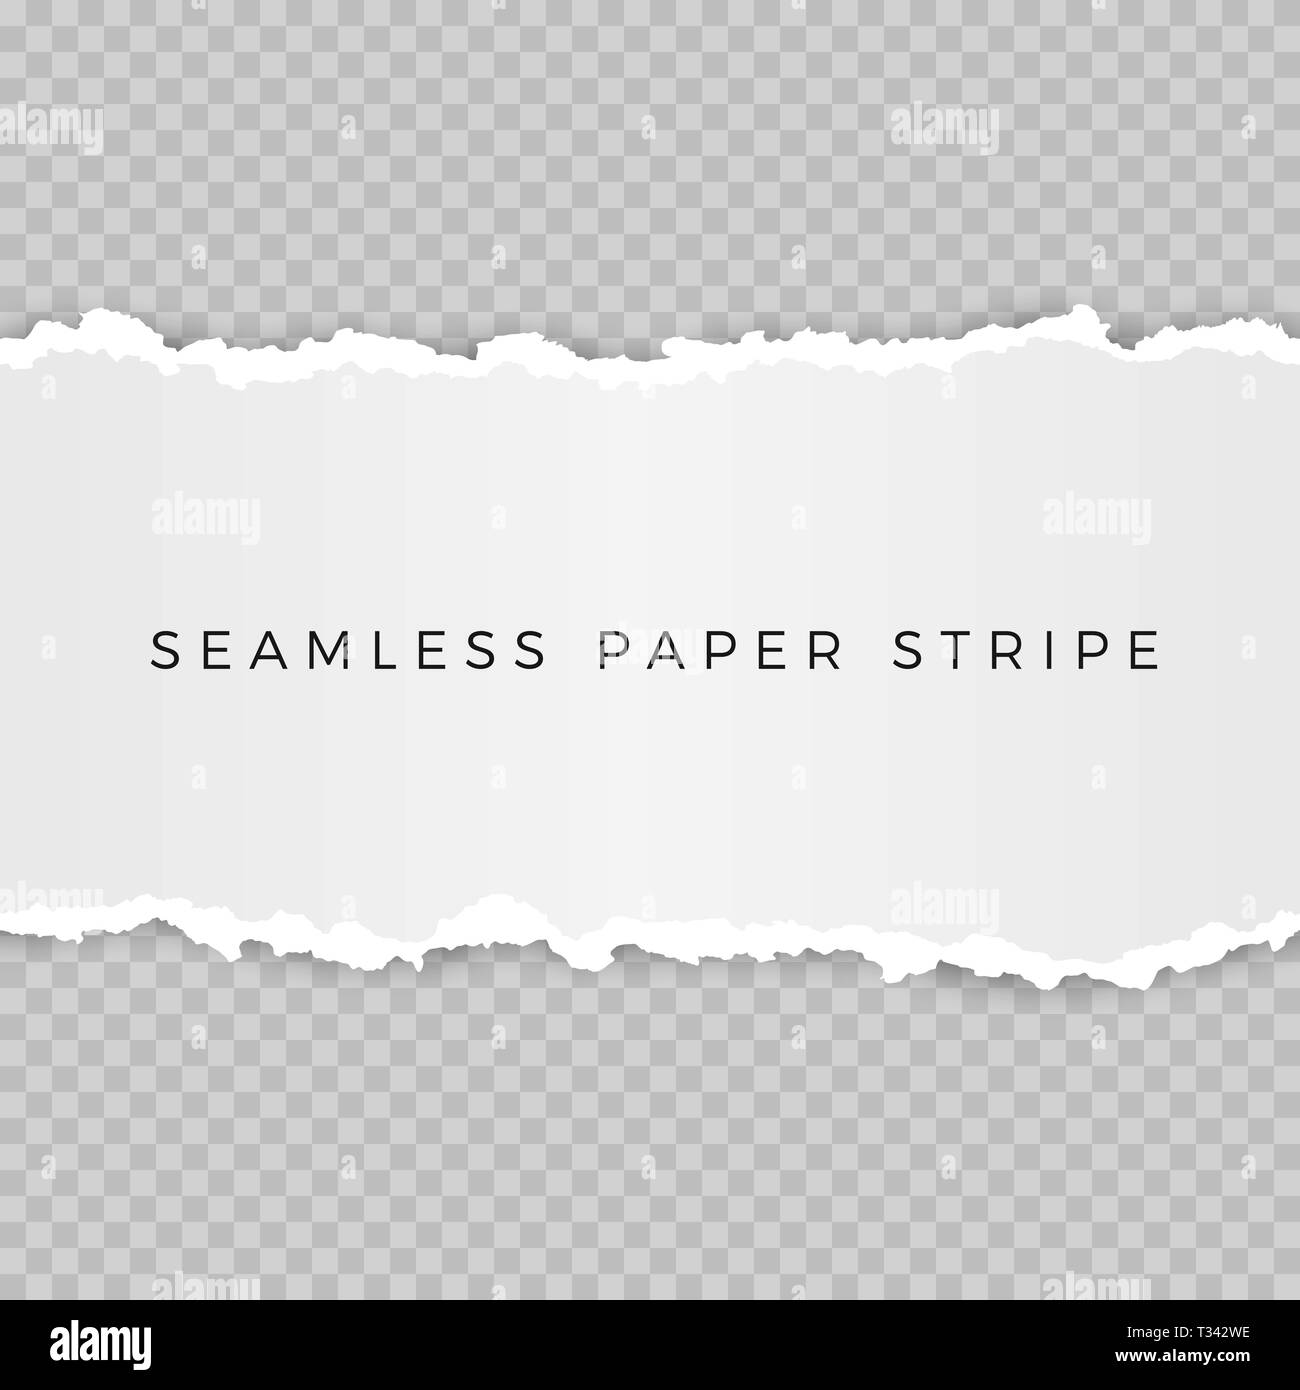 Seamless paper border.  Paper texture with damaged edge isolated on transparent background. Vector illustration Stock Vector